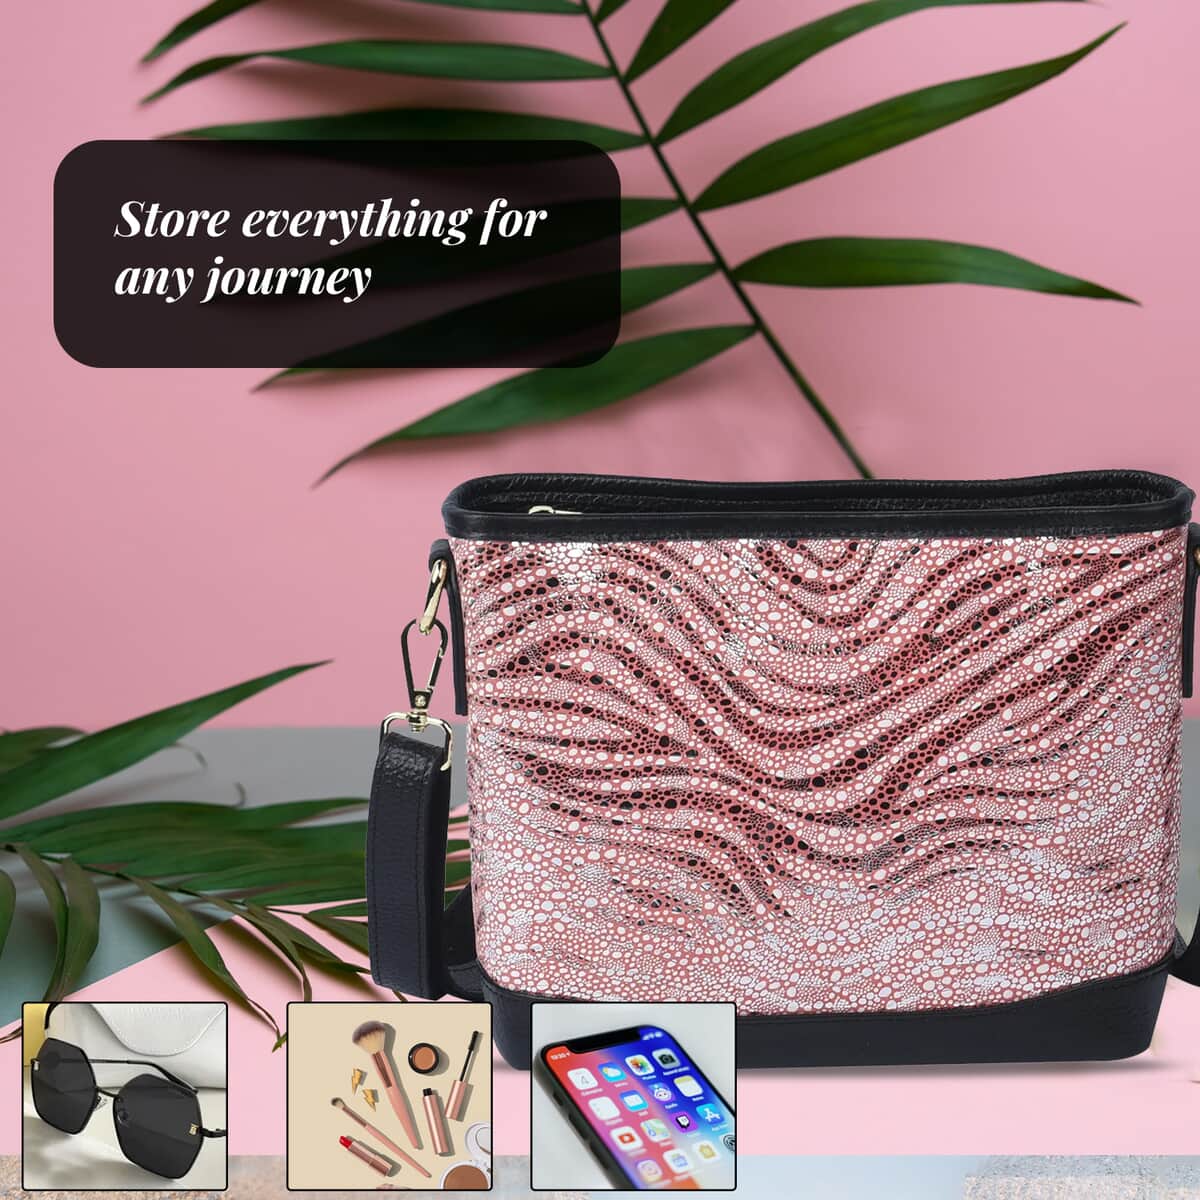 Shop LC Hong Kong Closeout Collection Zebra Print Leather Crossbody Bags  for Women Birthday Gifts